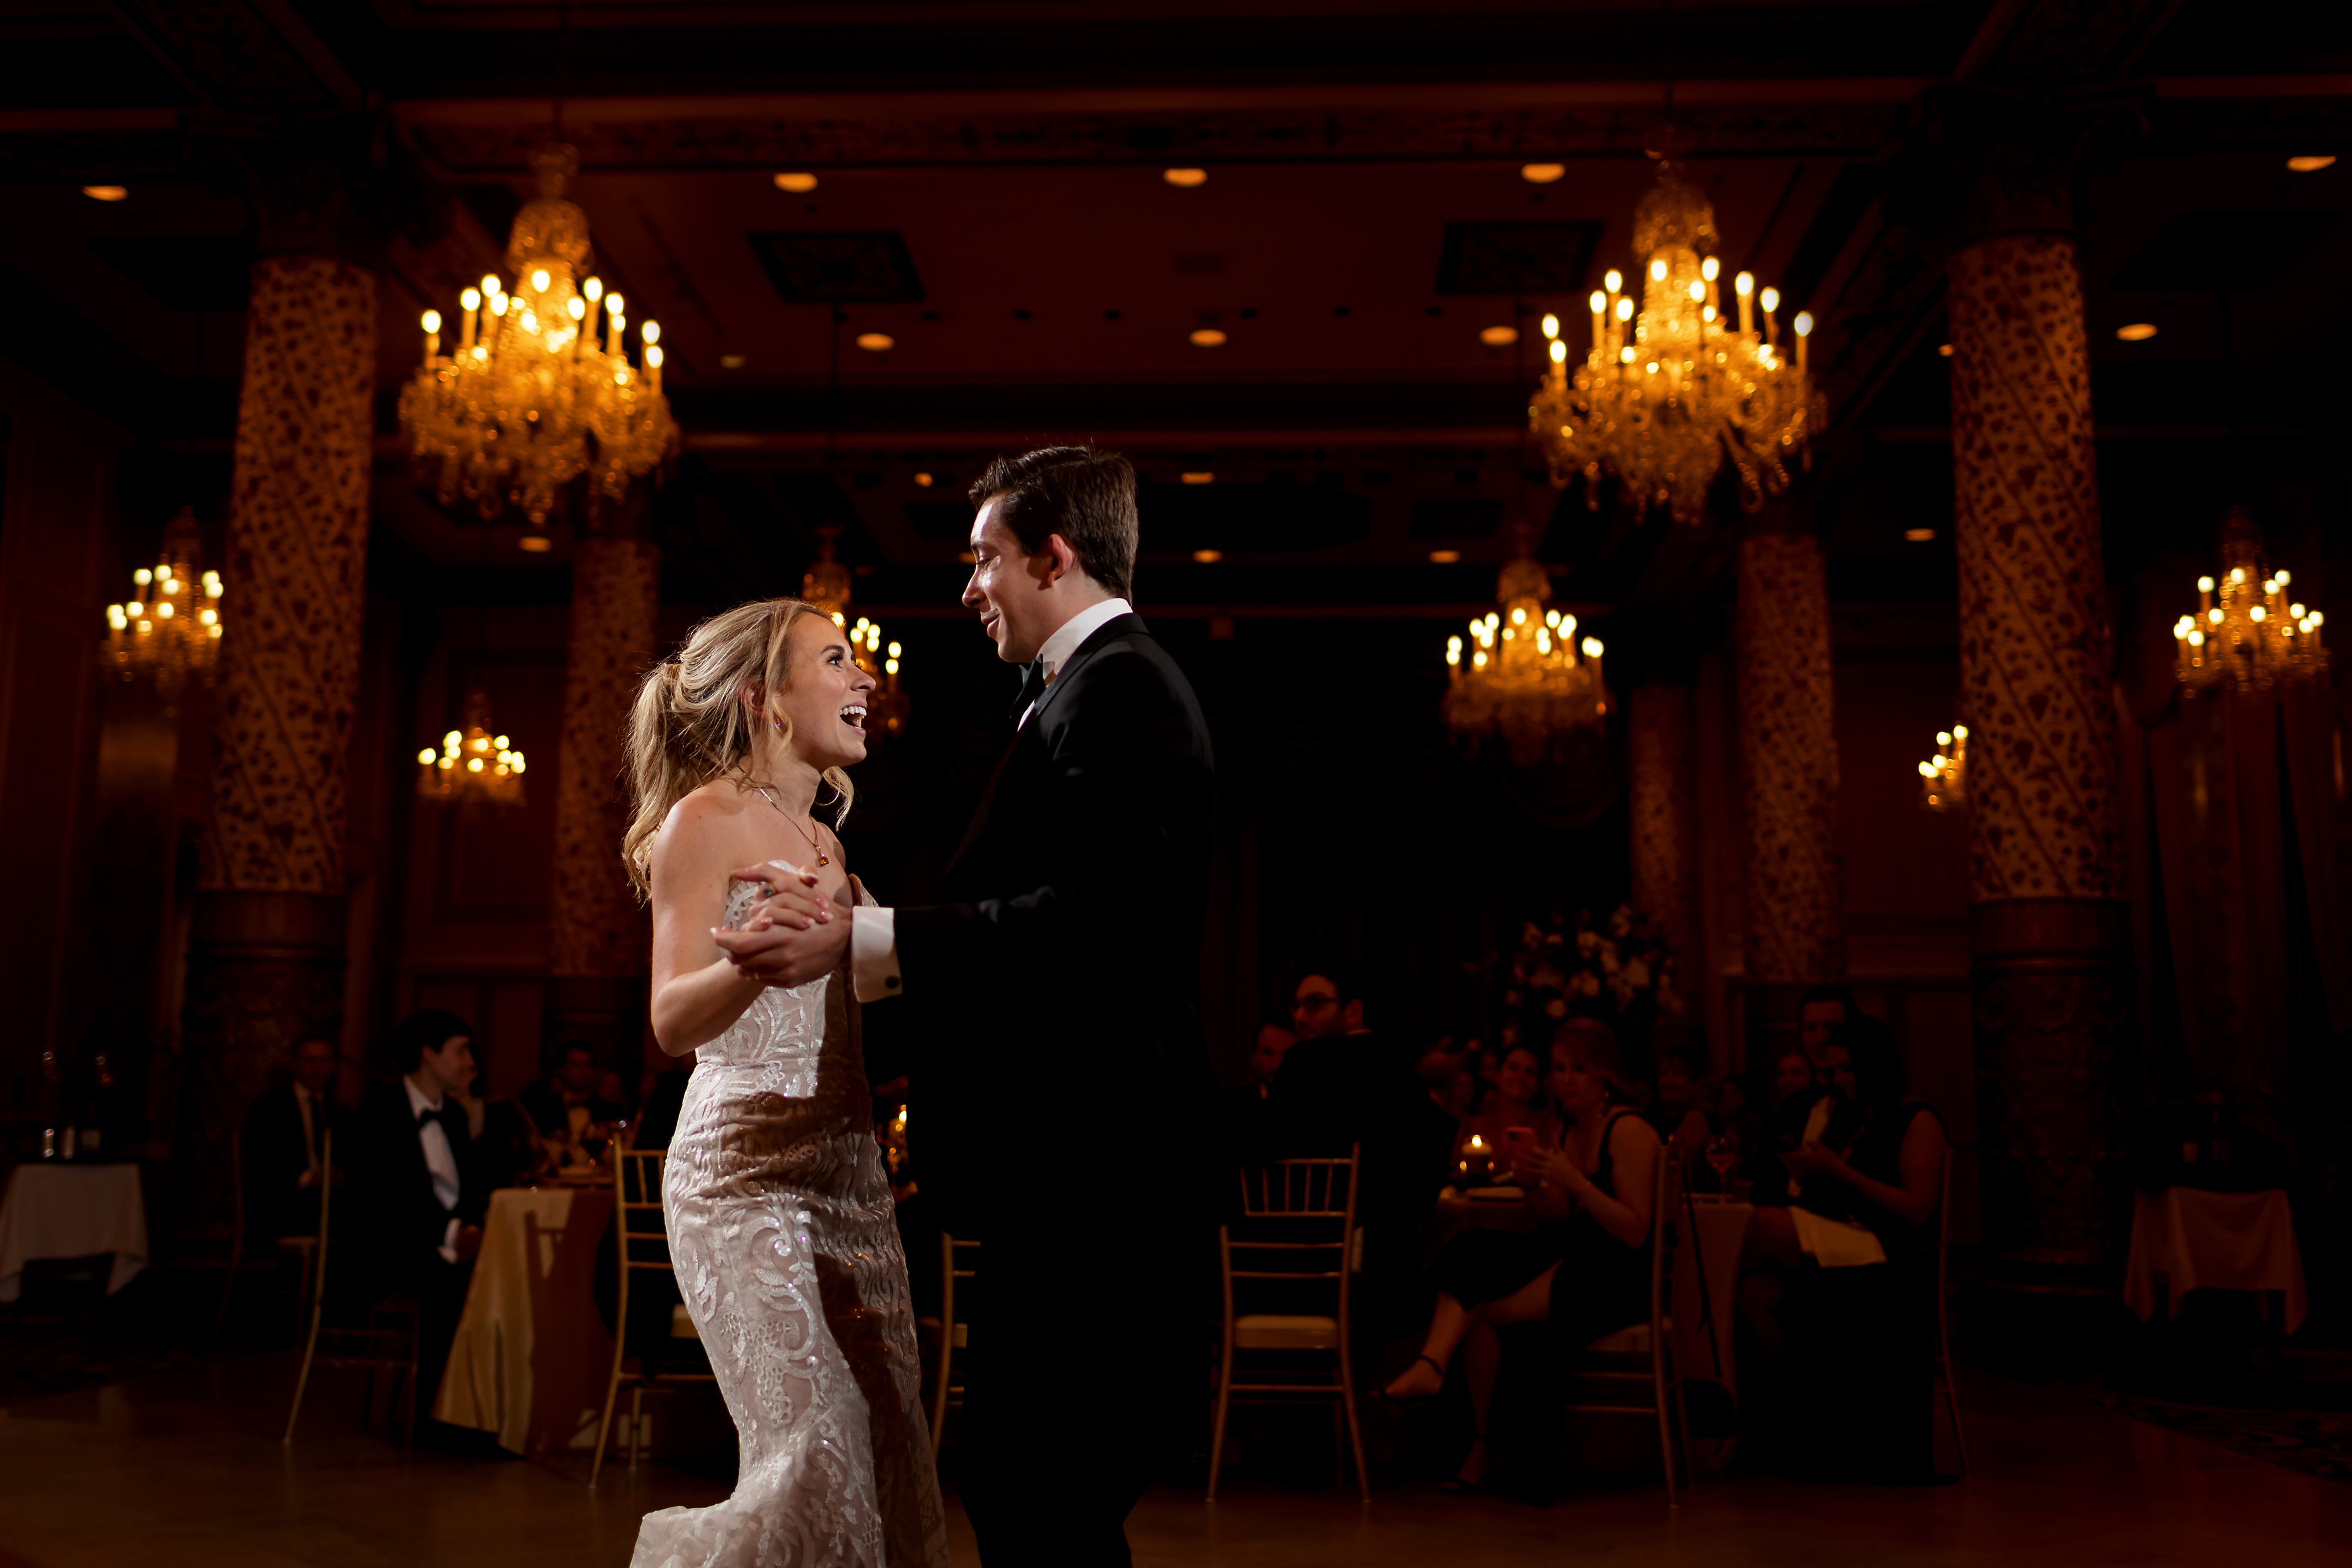 Bride and groom have their first dance during wedding reception in the Grand Ballroom at The Drake Hotel in Chicago